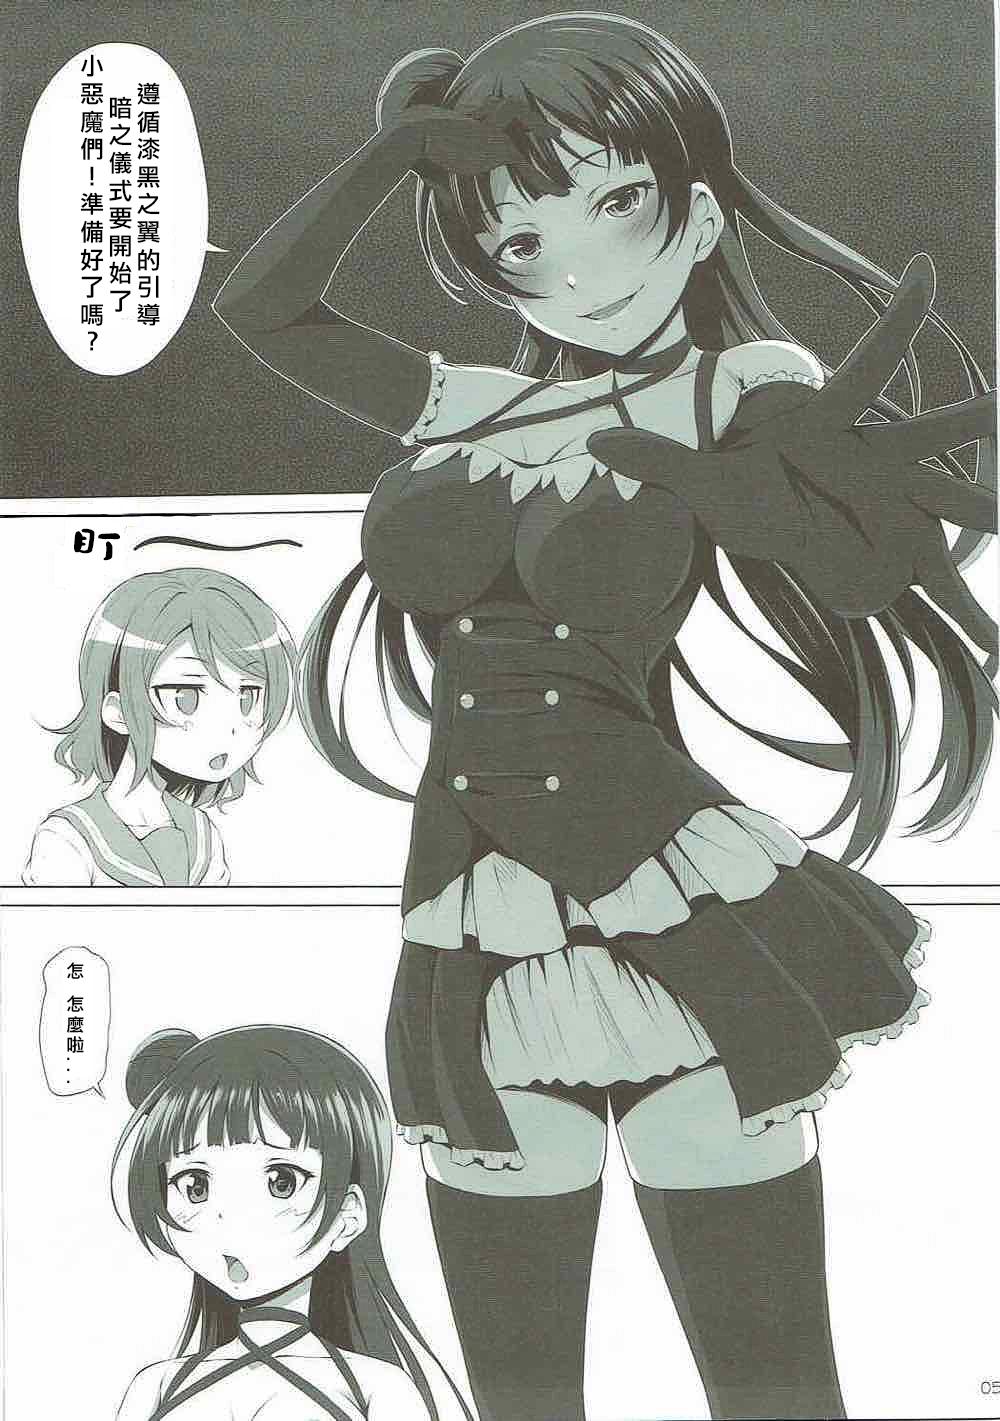 Chicks Datenshi vs Cosplay Maou | 墮天使 VS Cosplay魔王 - Love live sunshine Fucking Pussy - Page 4